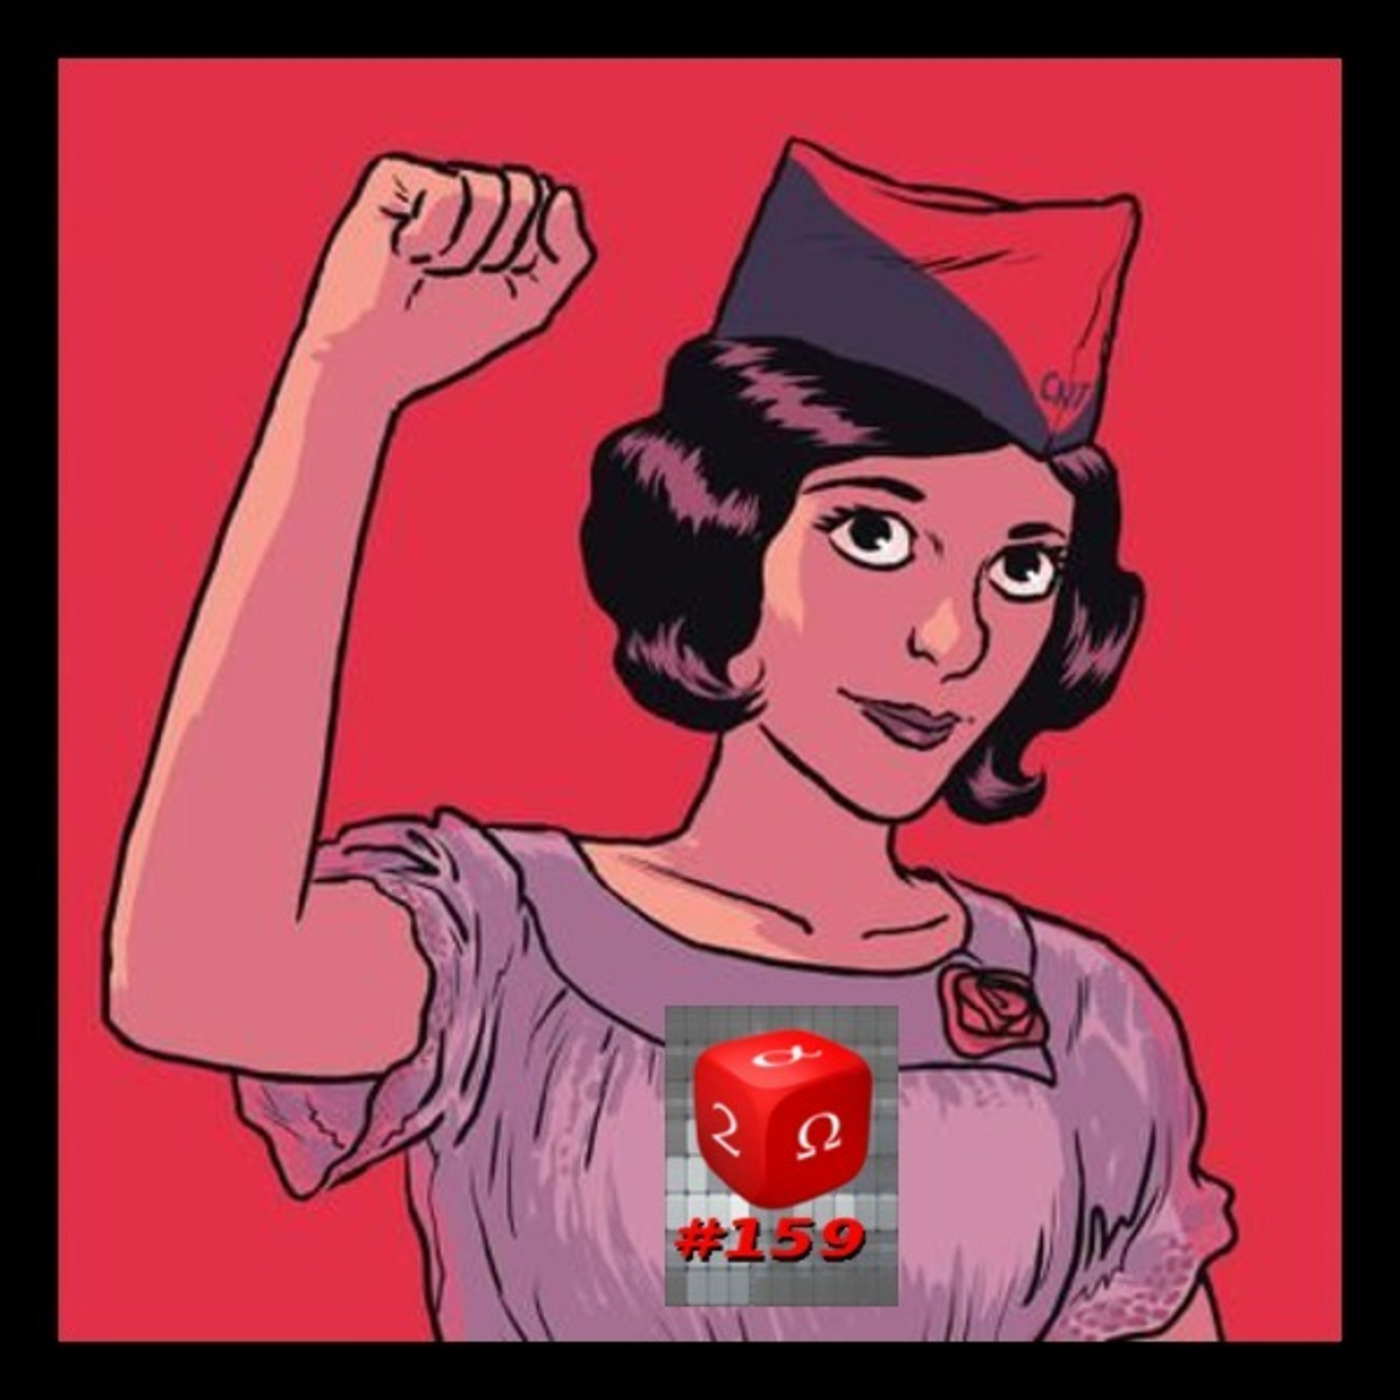 Episode 241: #159 Anarchism and Marxism w/ Zoe Baker Part 1